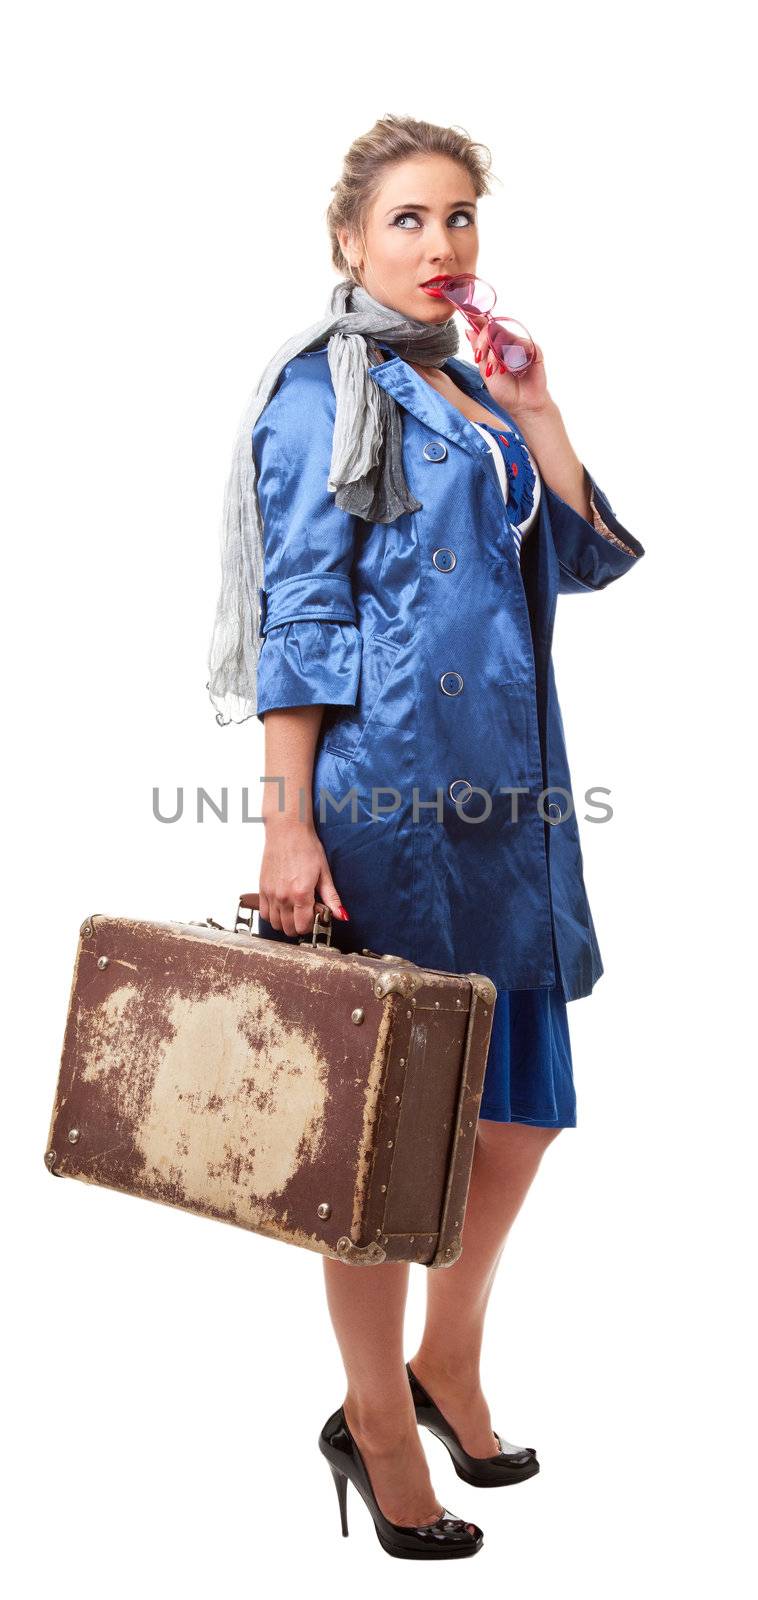 young woman dressed in retro style with an old suitcase